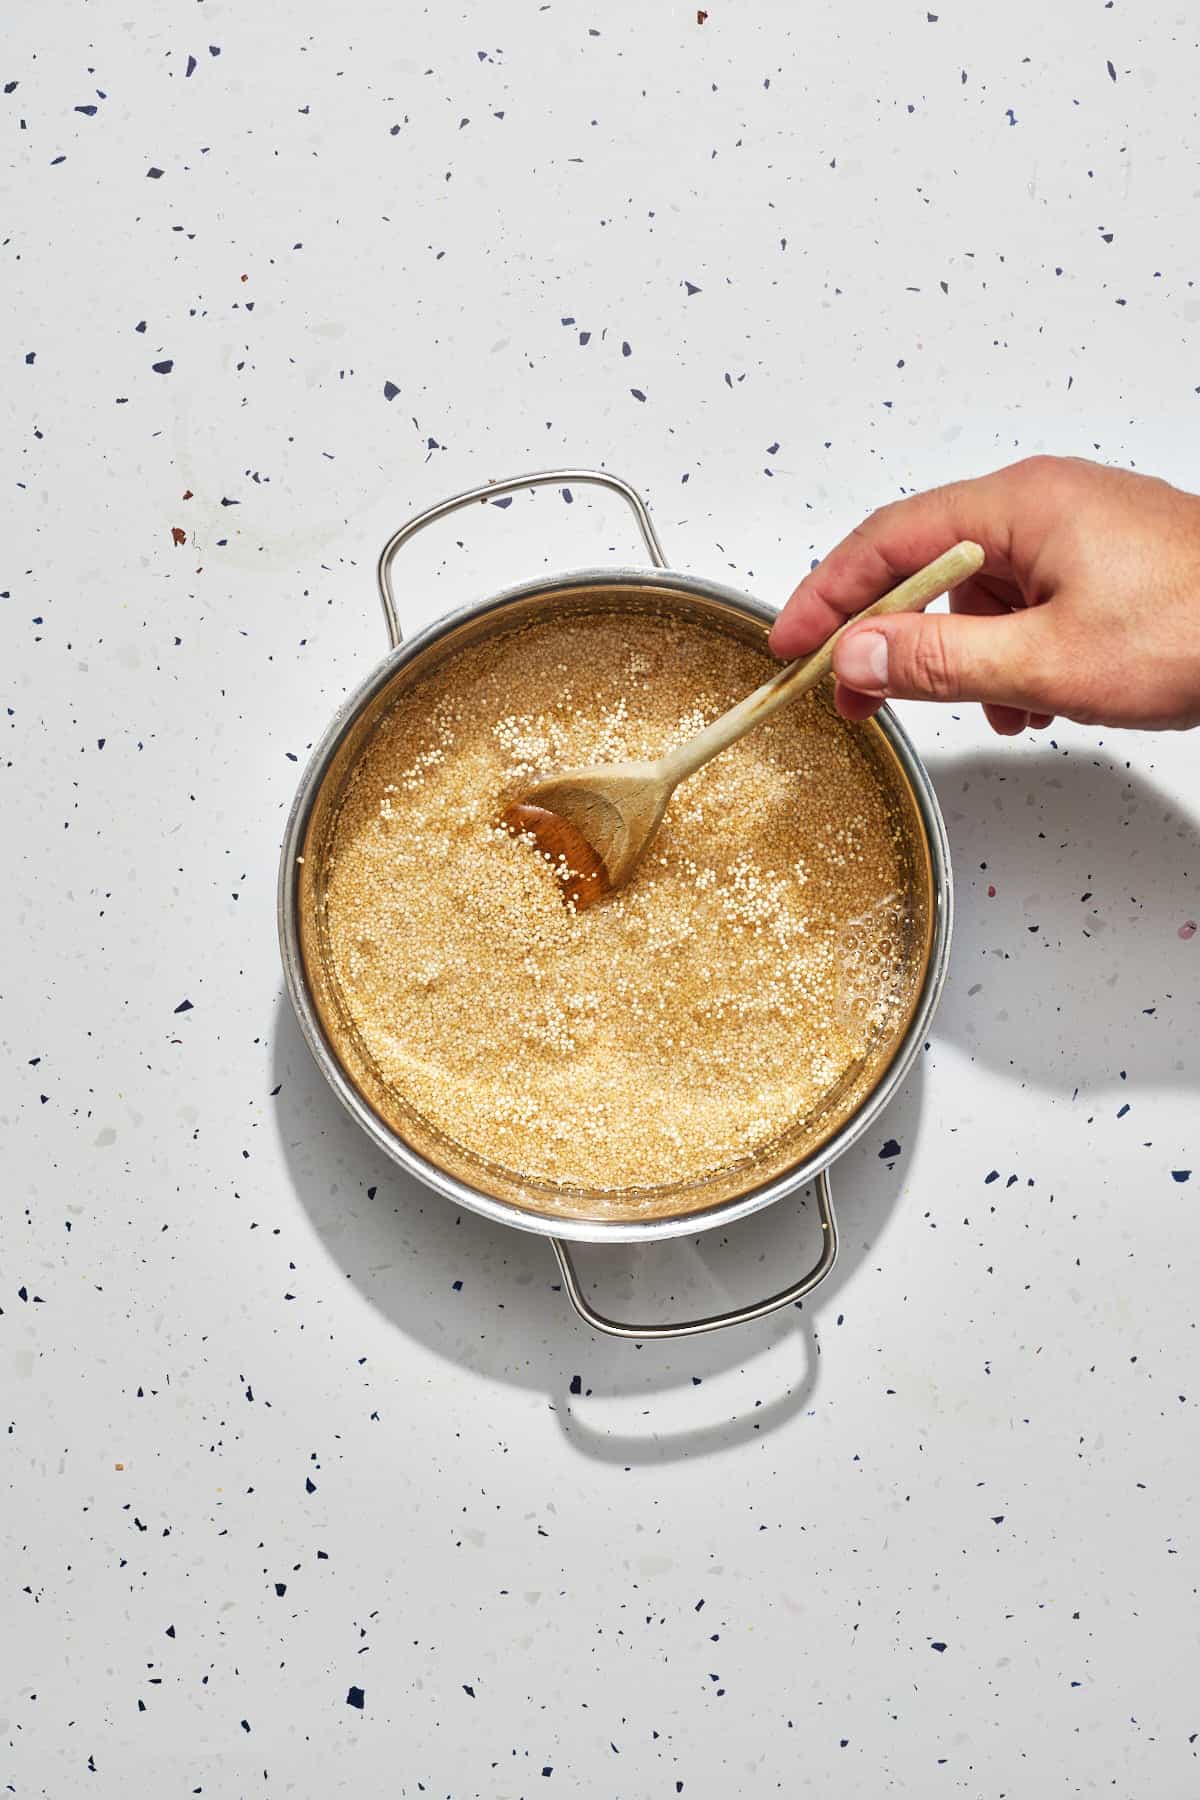 quinoa being stirred in a pot with water